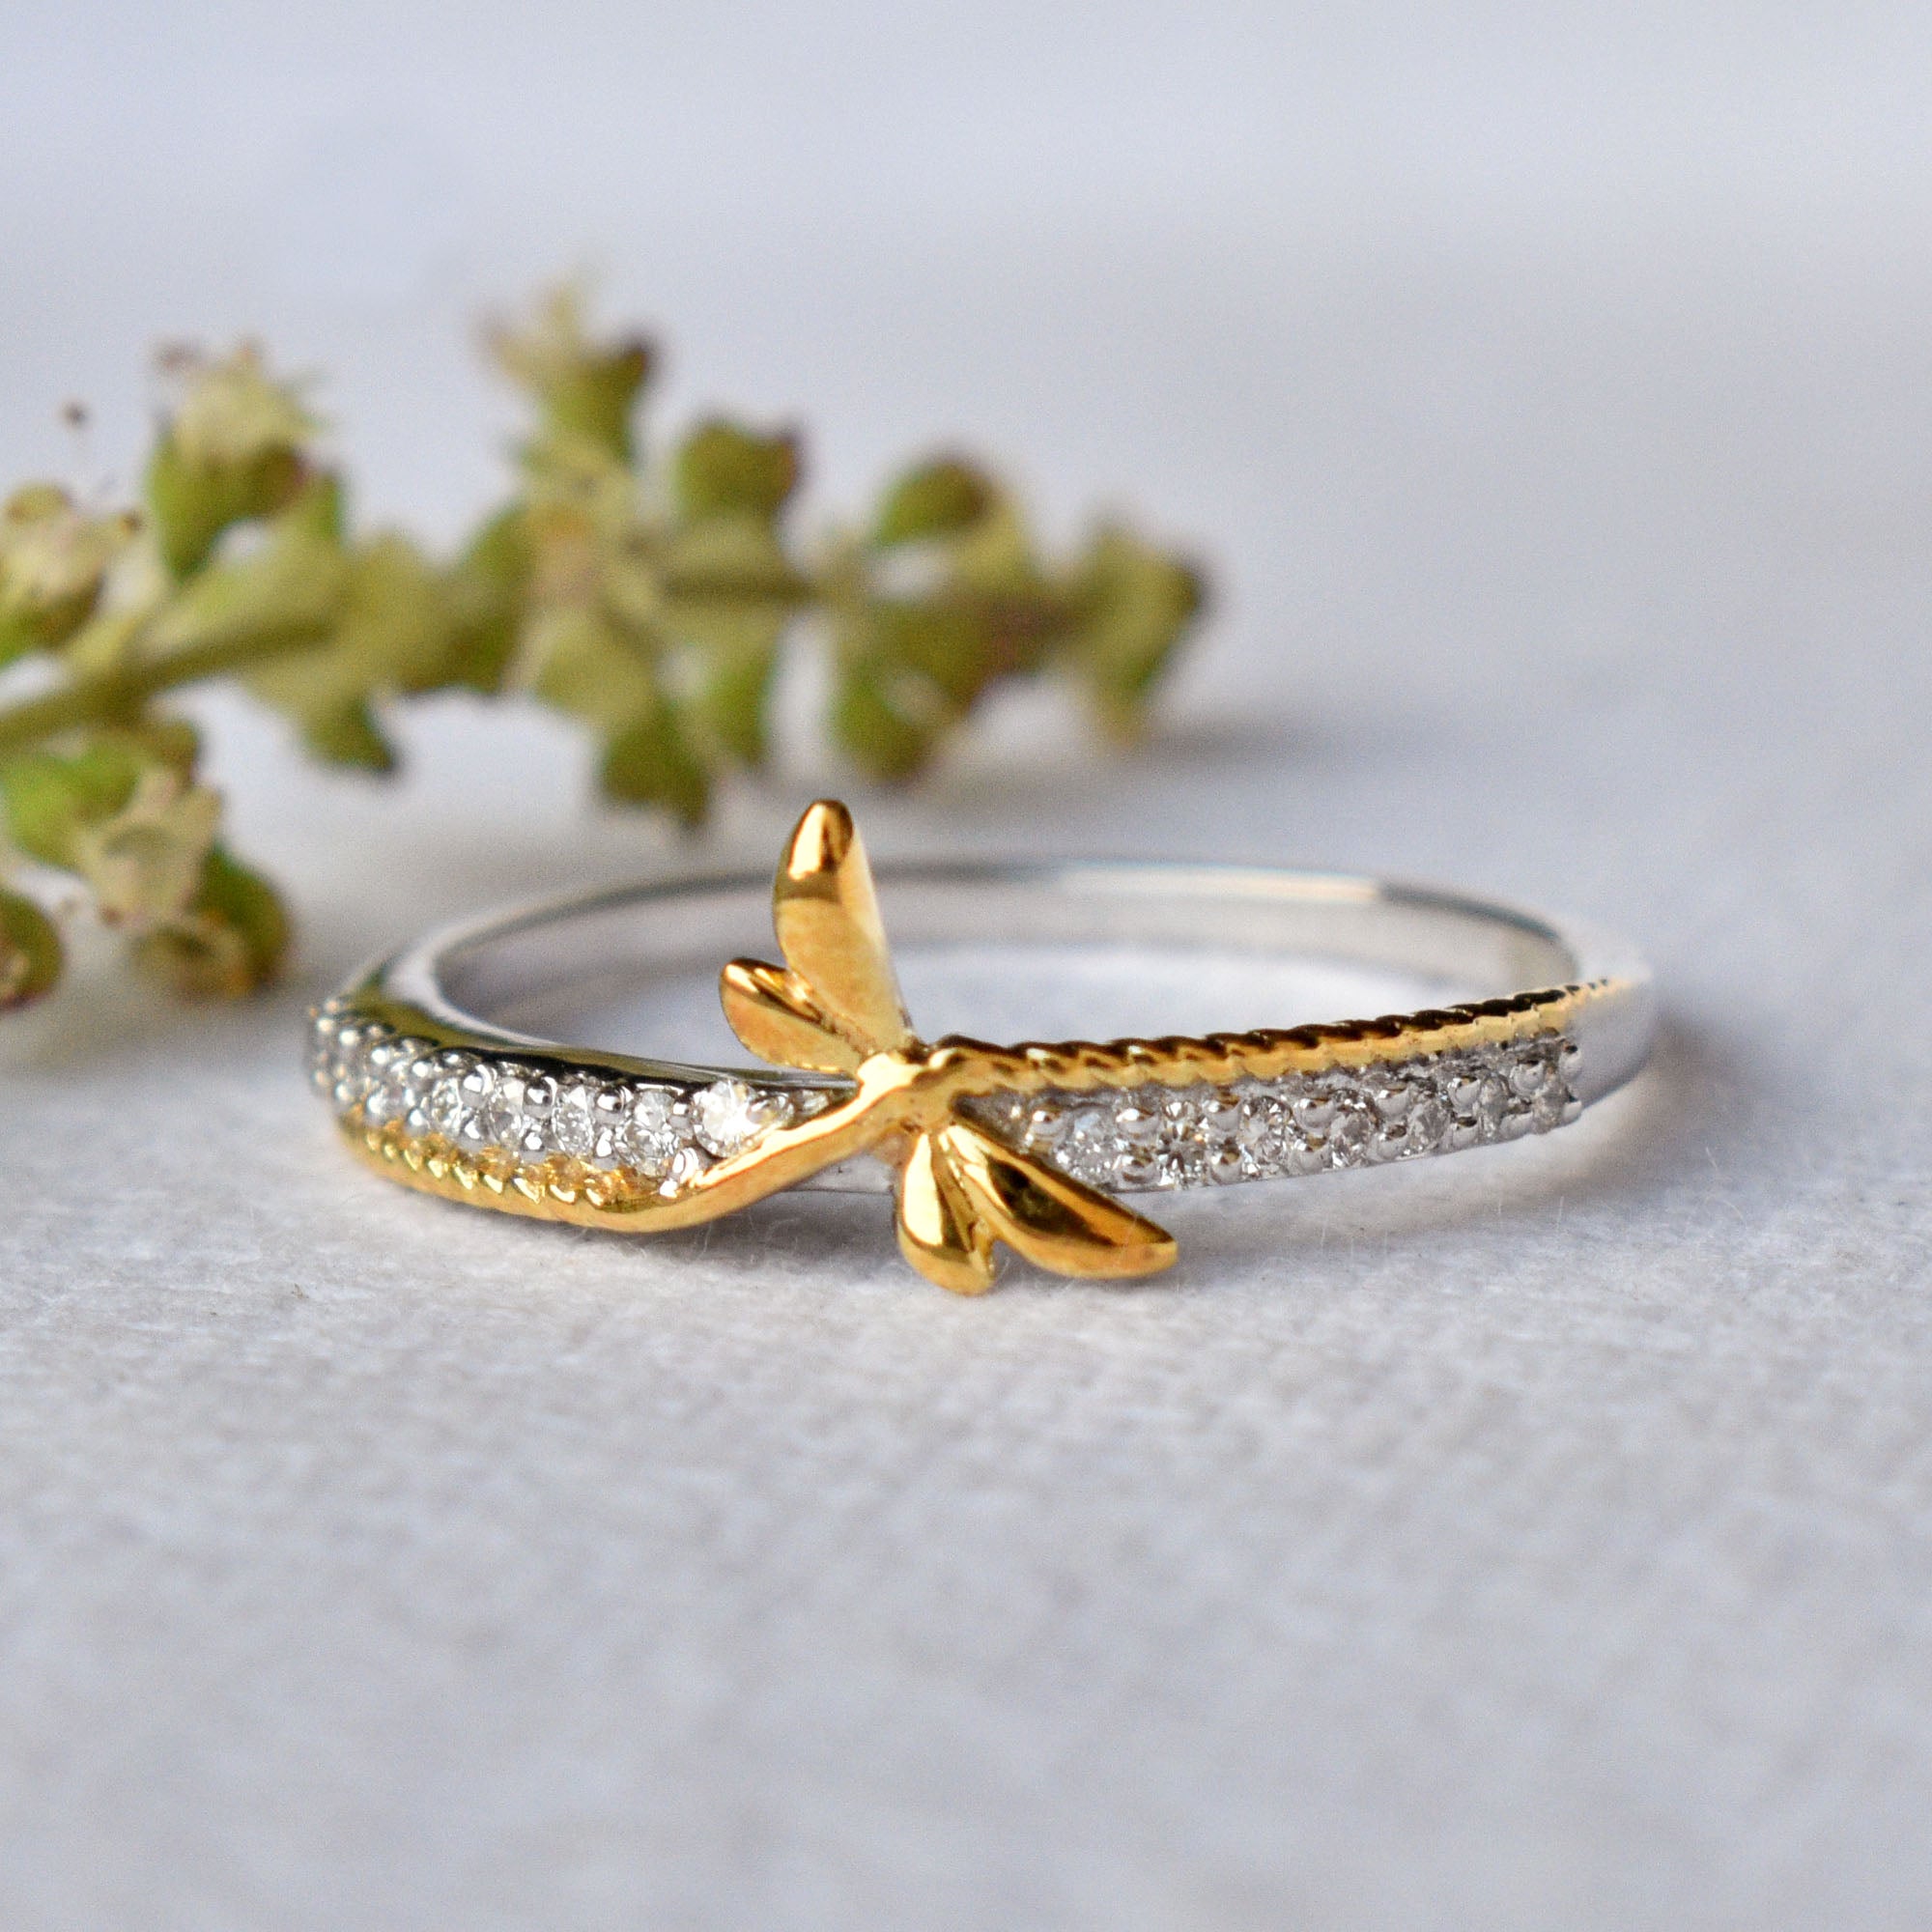 Dragonfly Ring in Gold and Diamond, Damselfly Ring